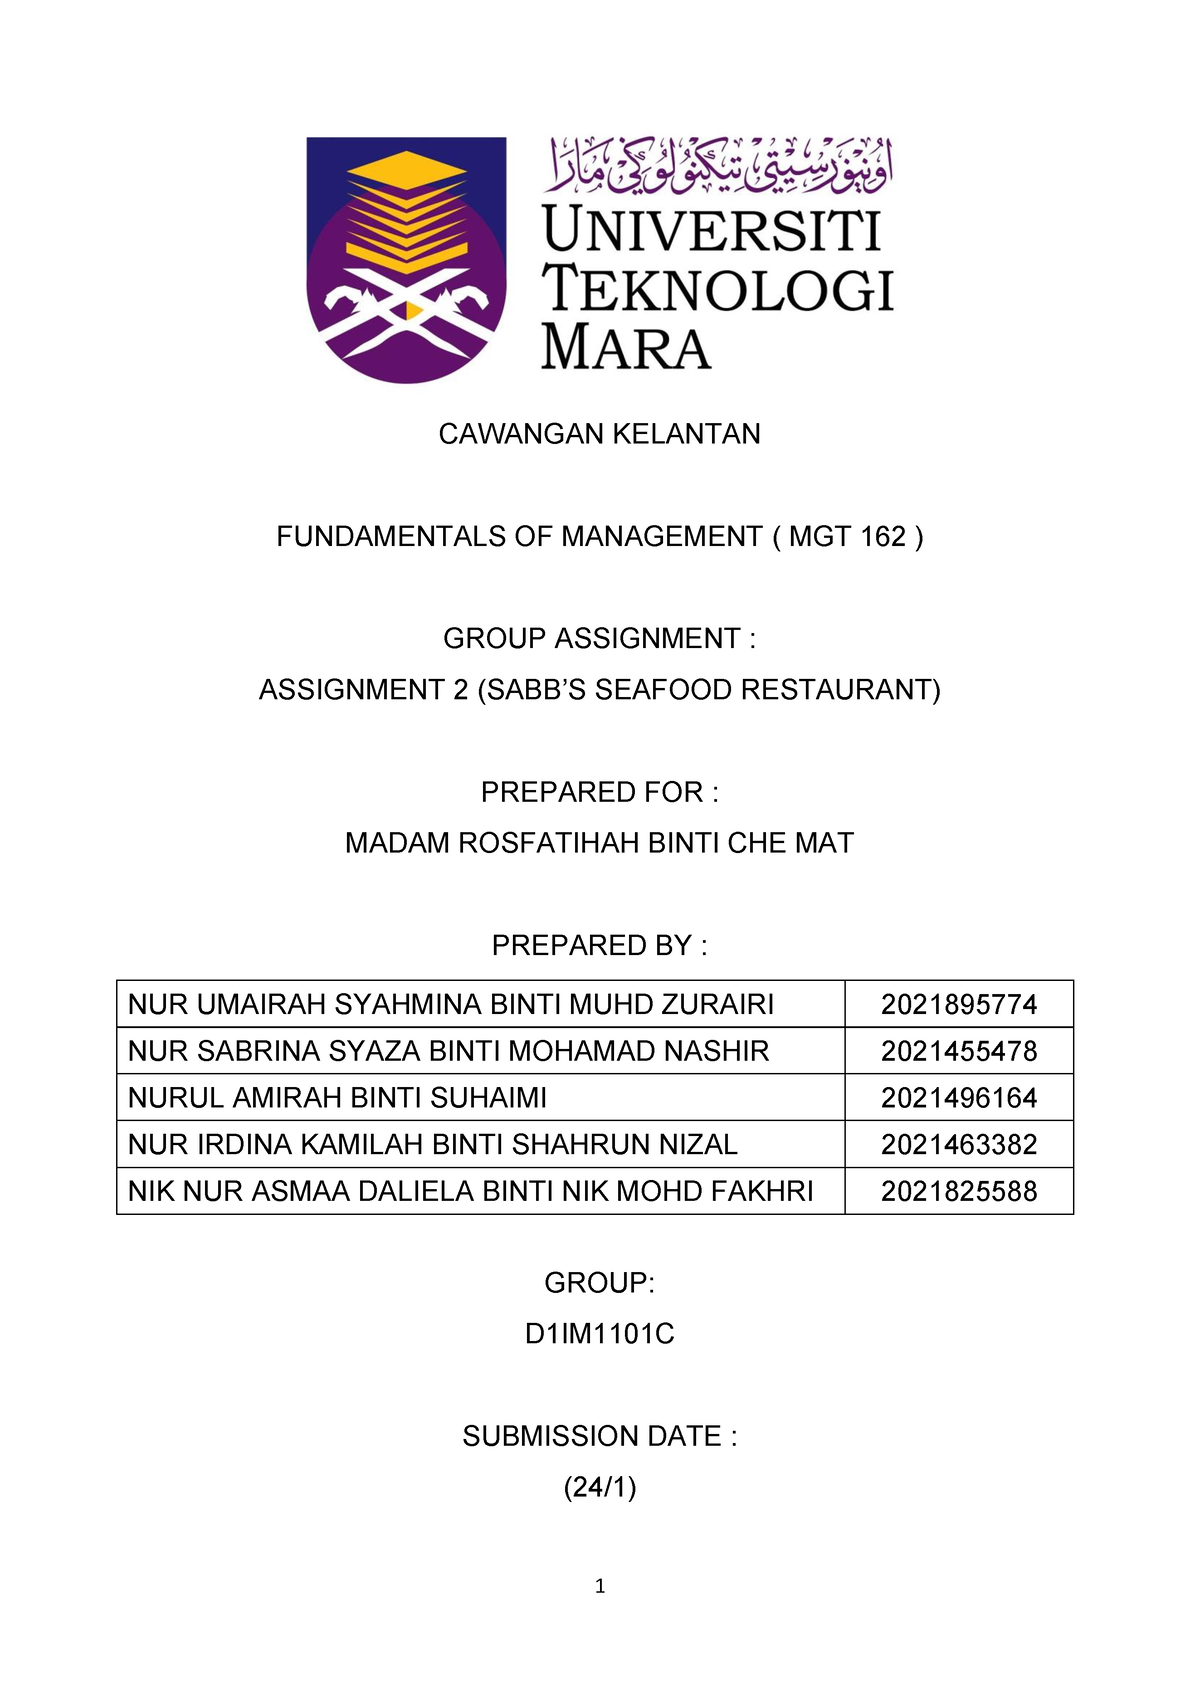 group assignment mgt 162